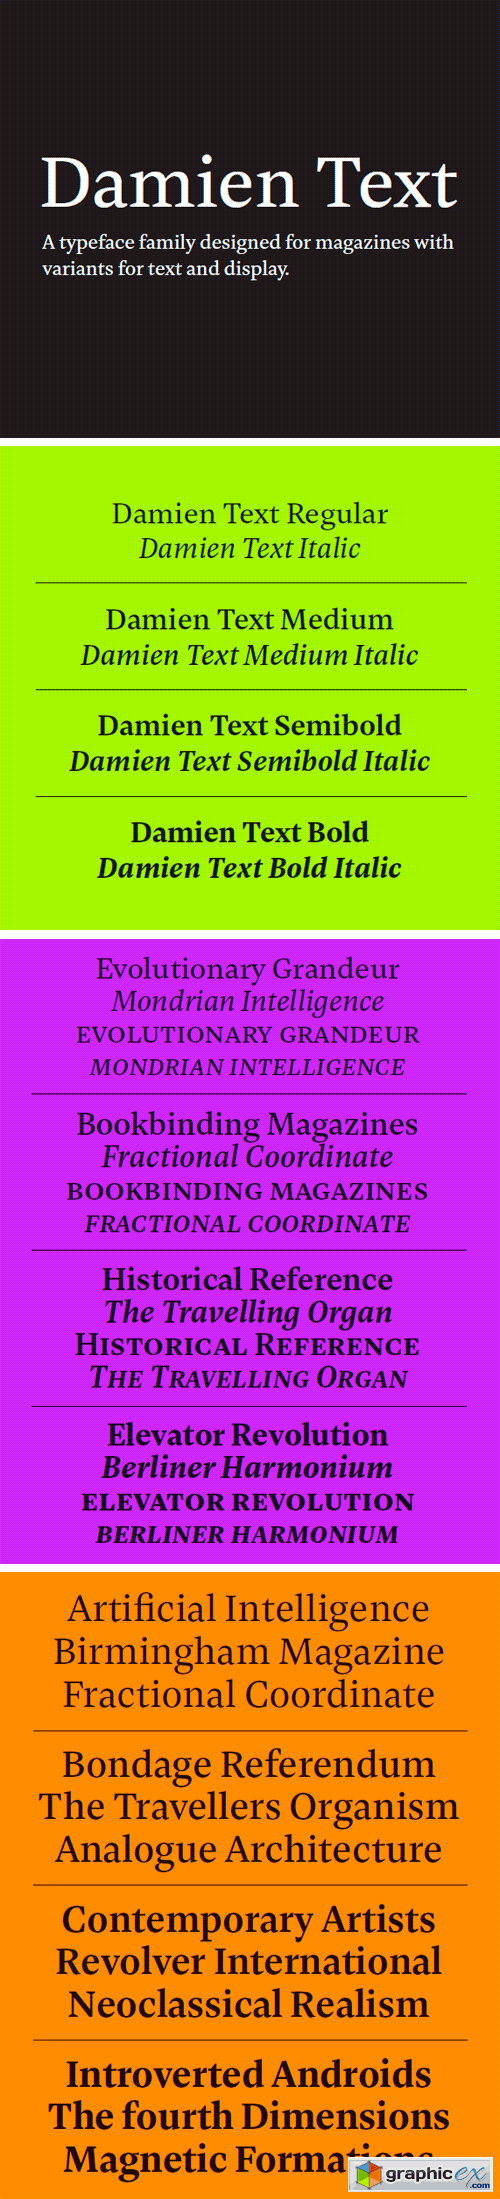 Damien Text Font Family